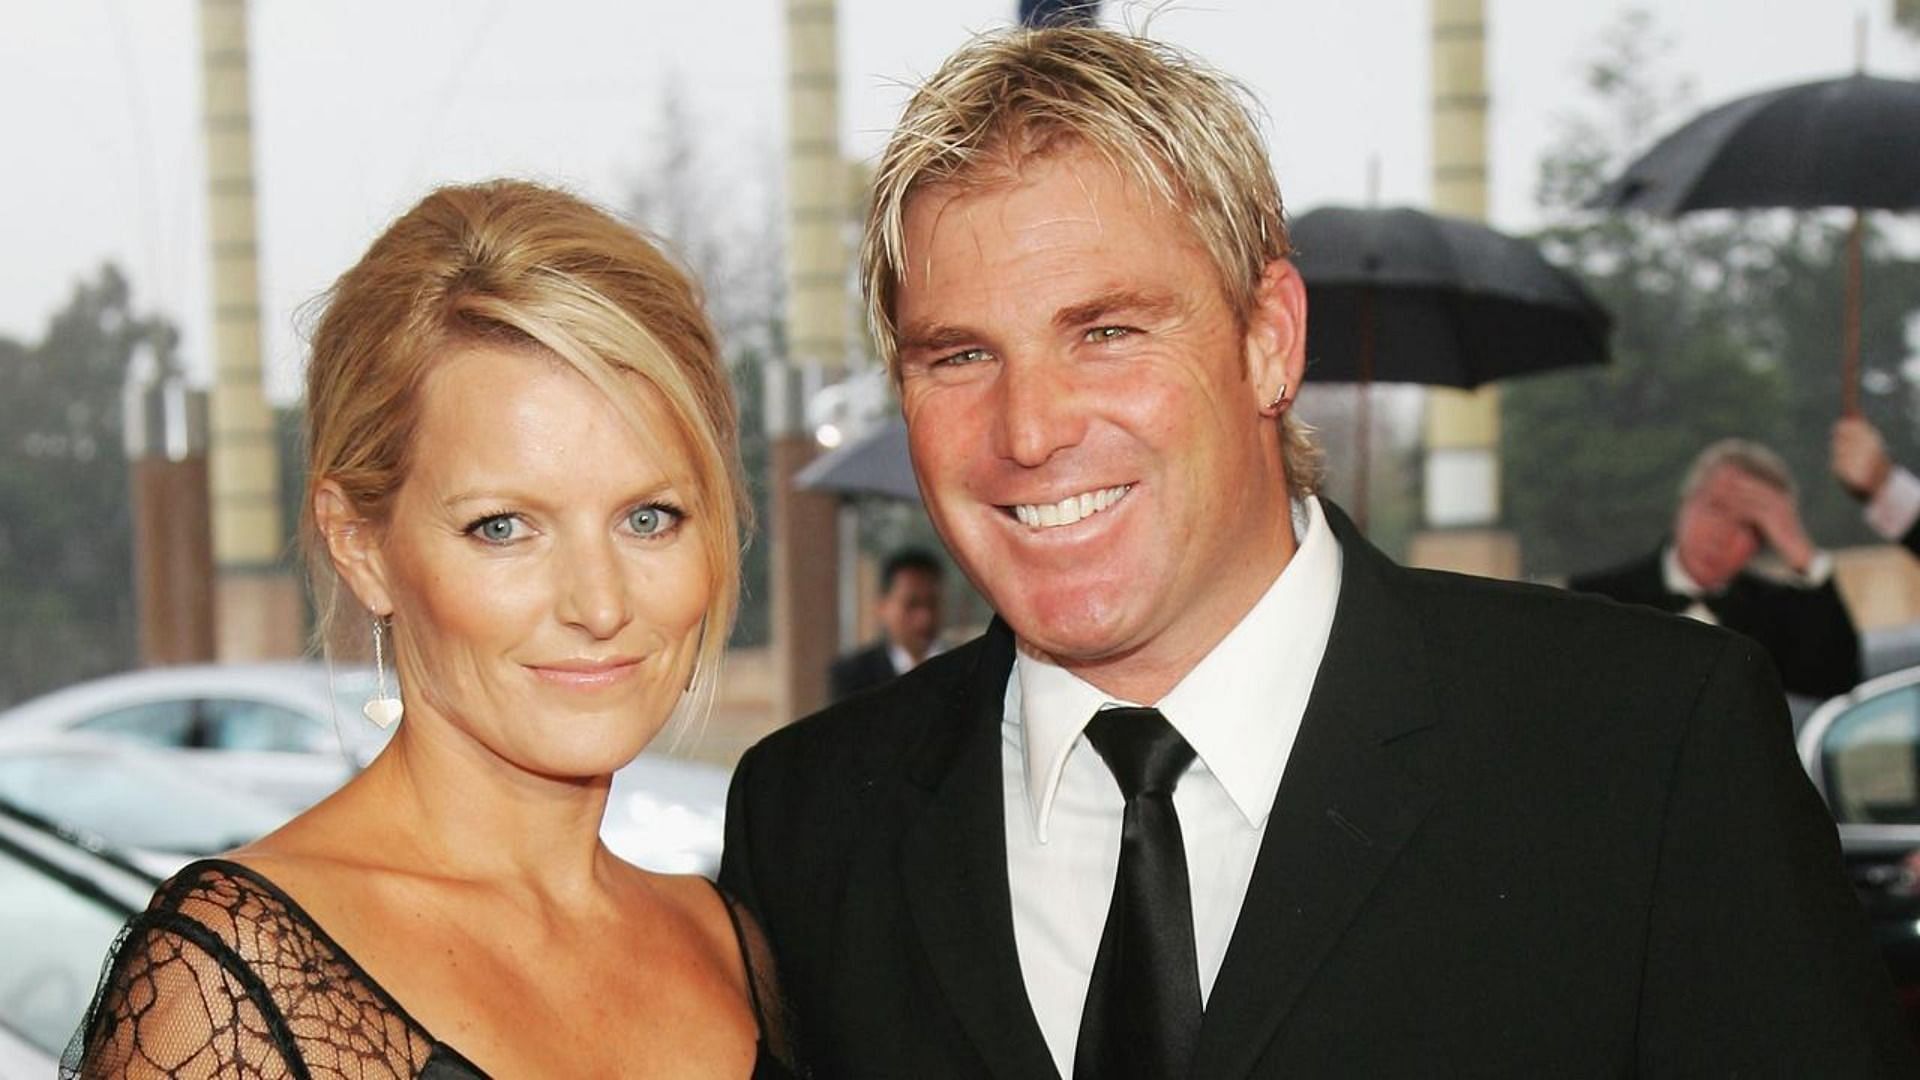 Shane Warne S Ex Wife Simone Callahan Goes Nude In Tv Special